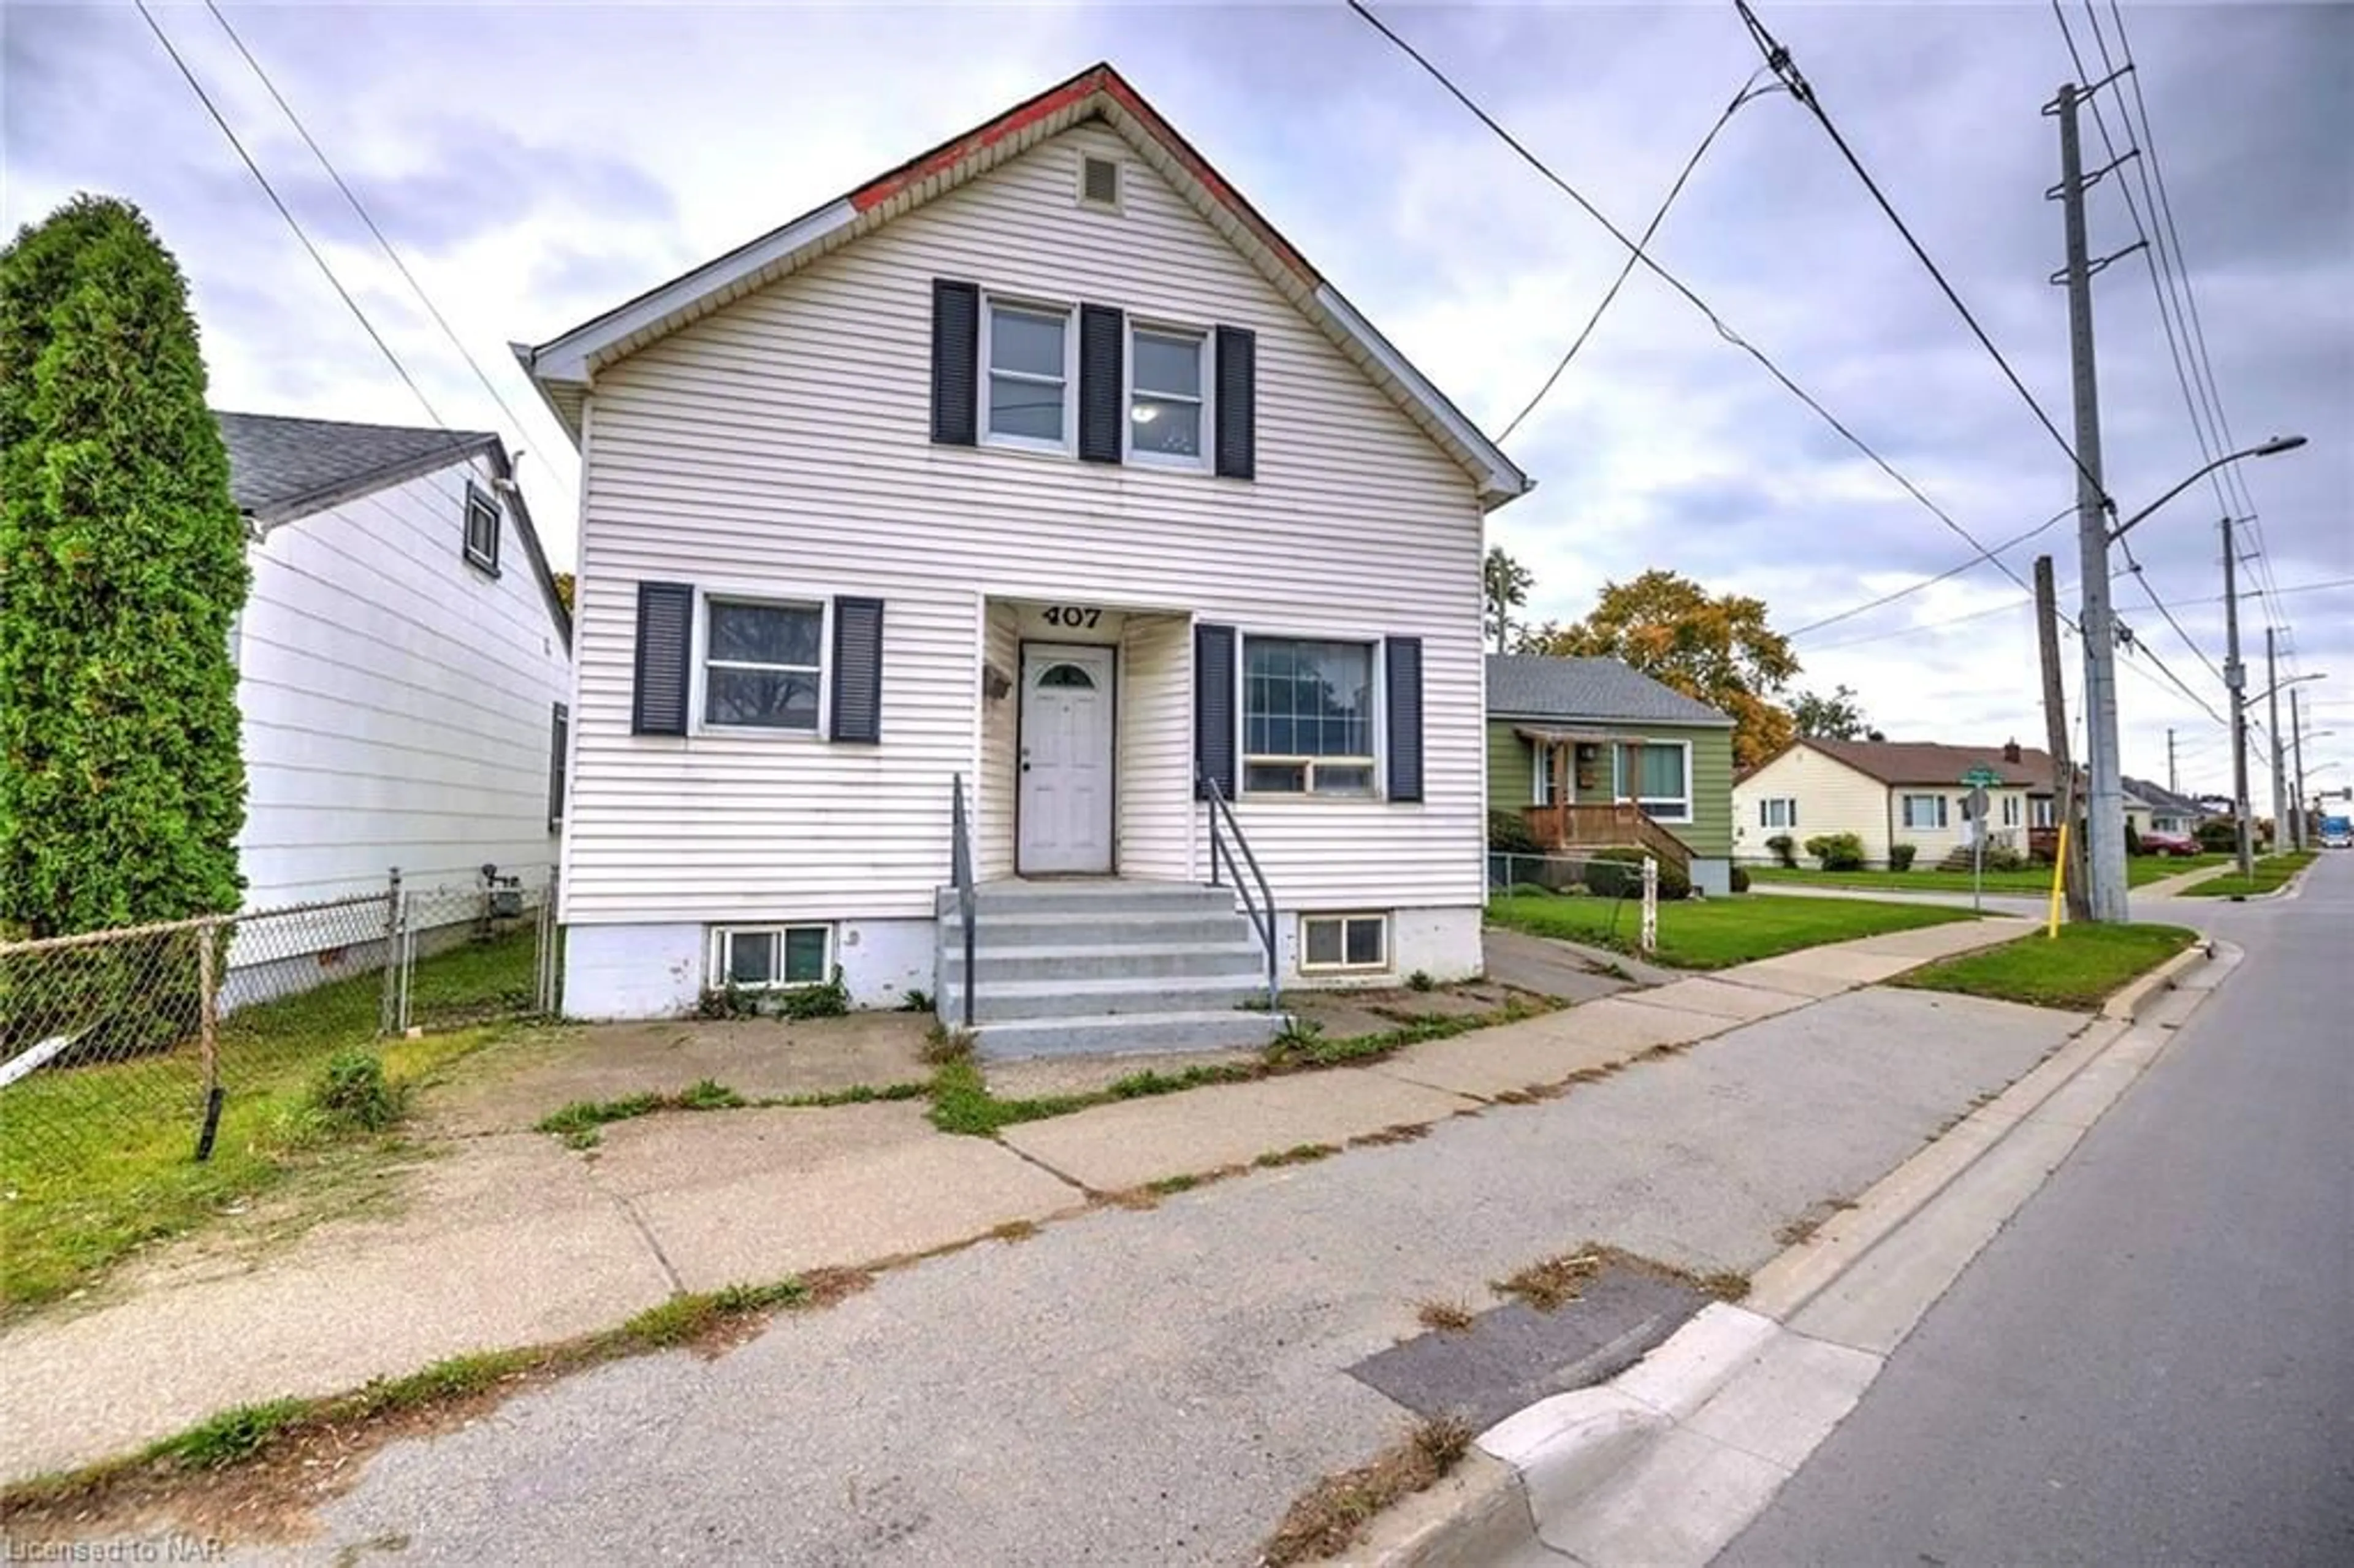 Frontside or backside of a home for 407 Welland Ave, St. Catharines Ontario L2M 5T9